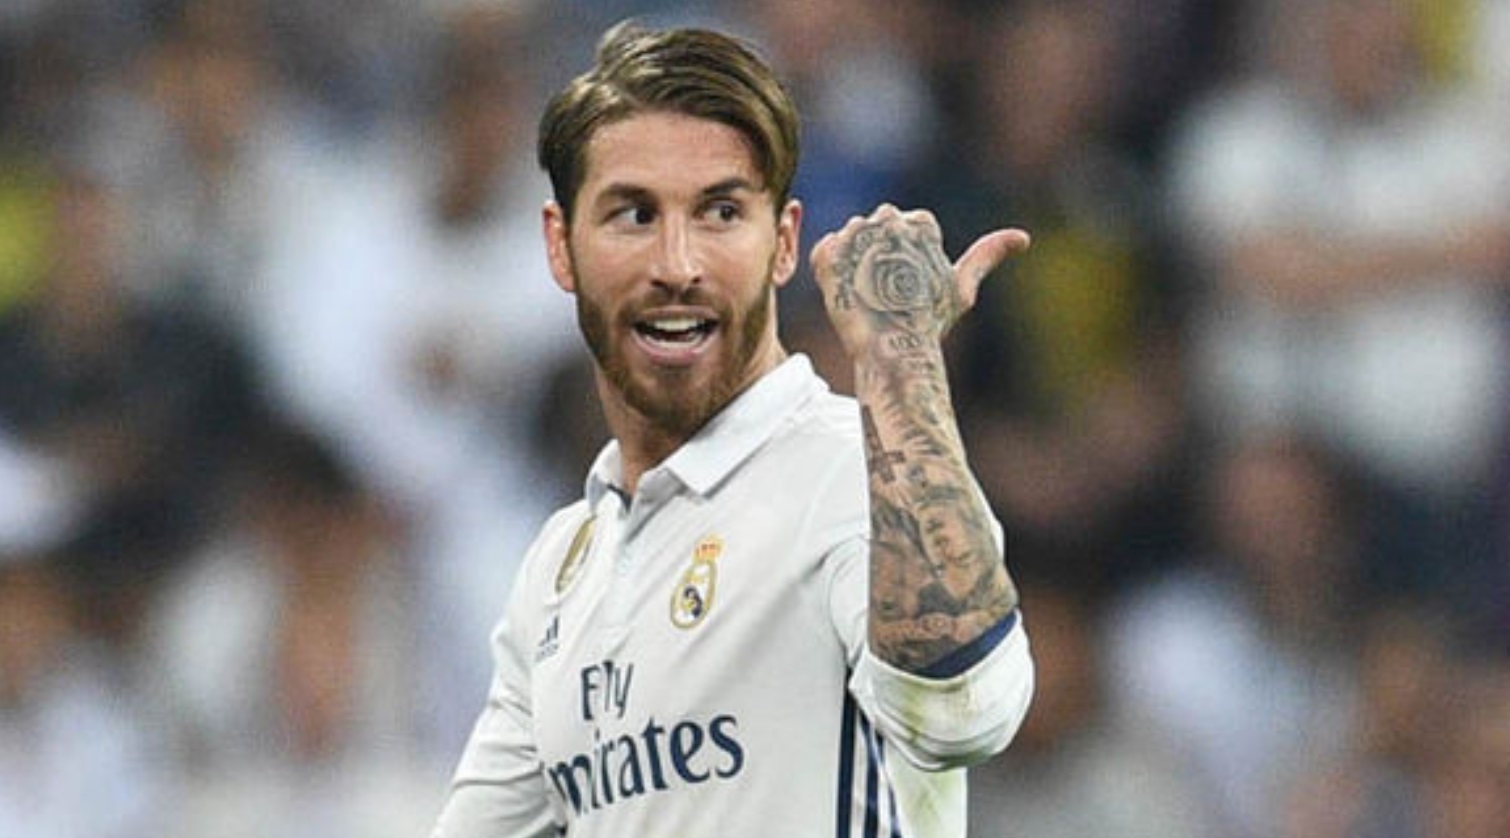 Ramos set most red cards record